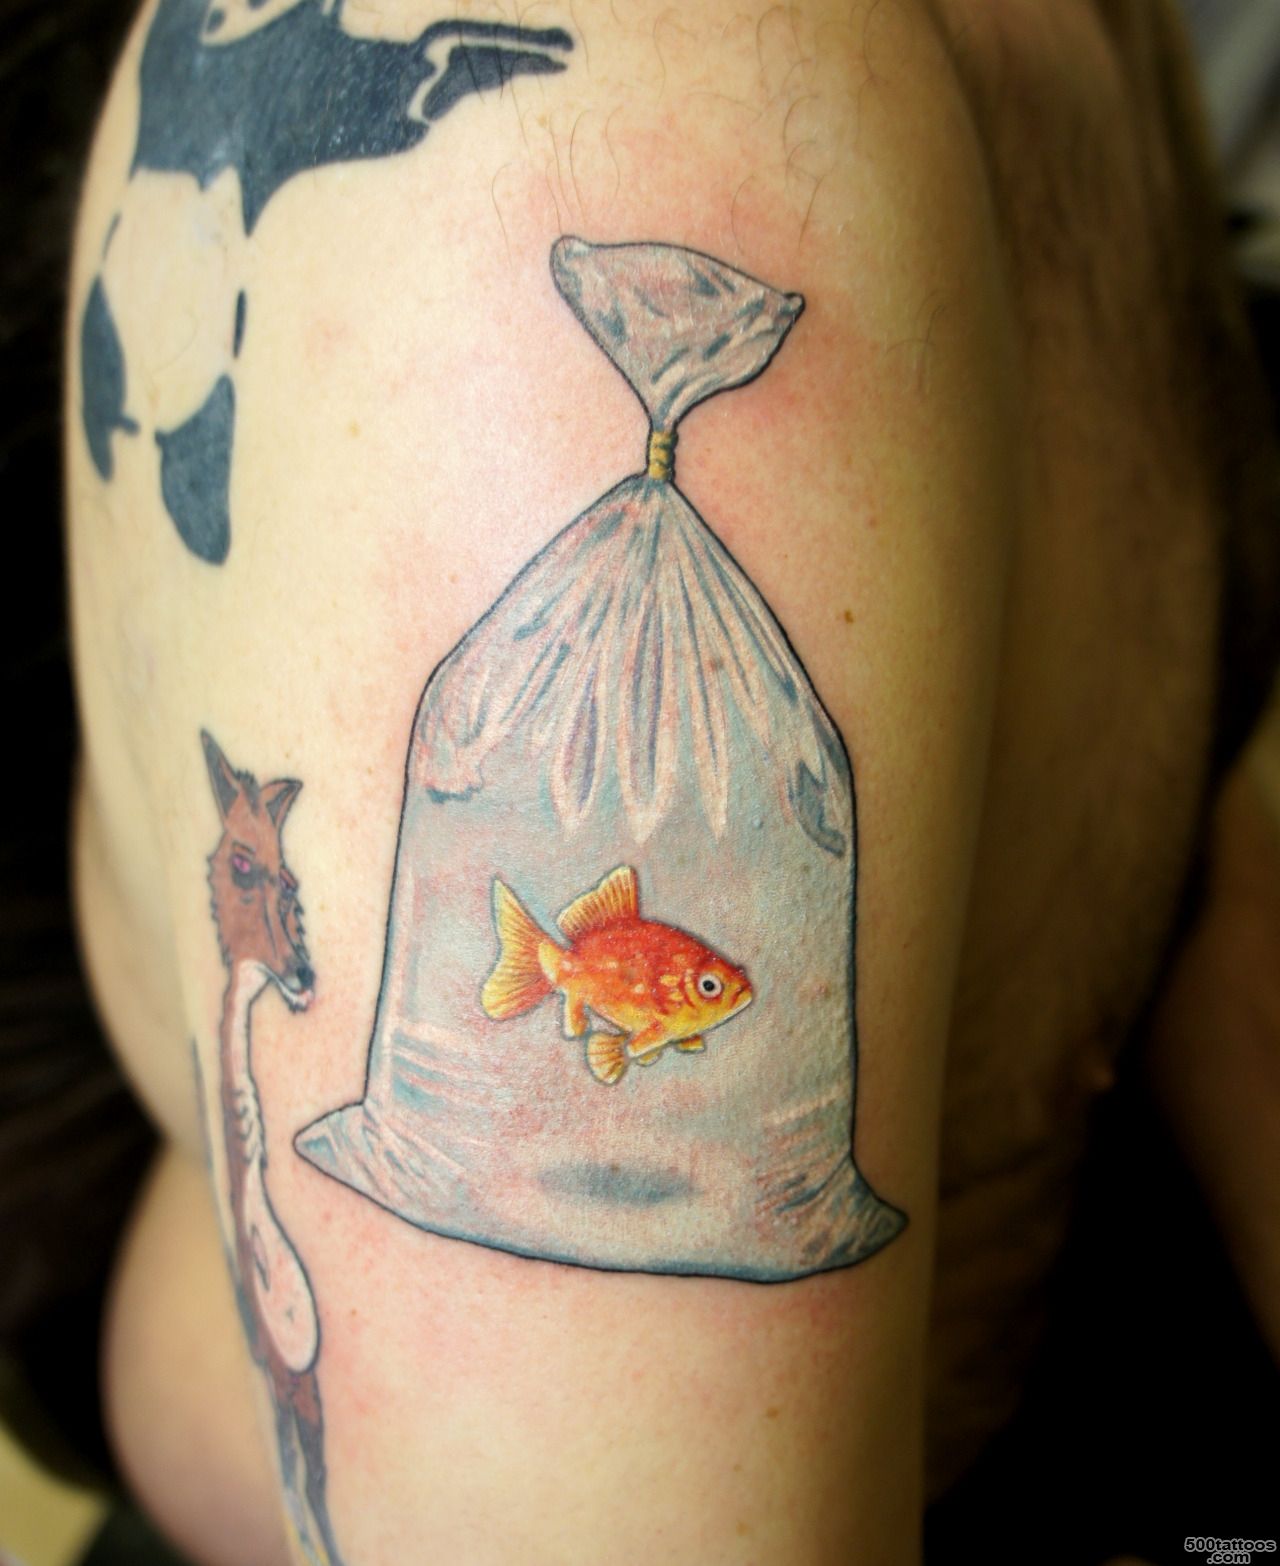 House of mojo tattoo parlour — goldfish in a bag. Loved doing this!!!_43